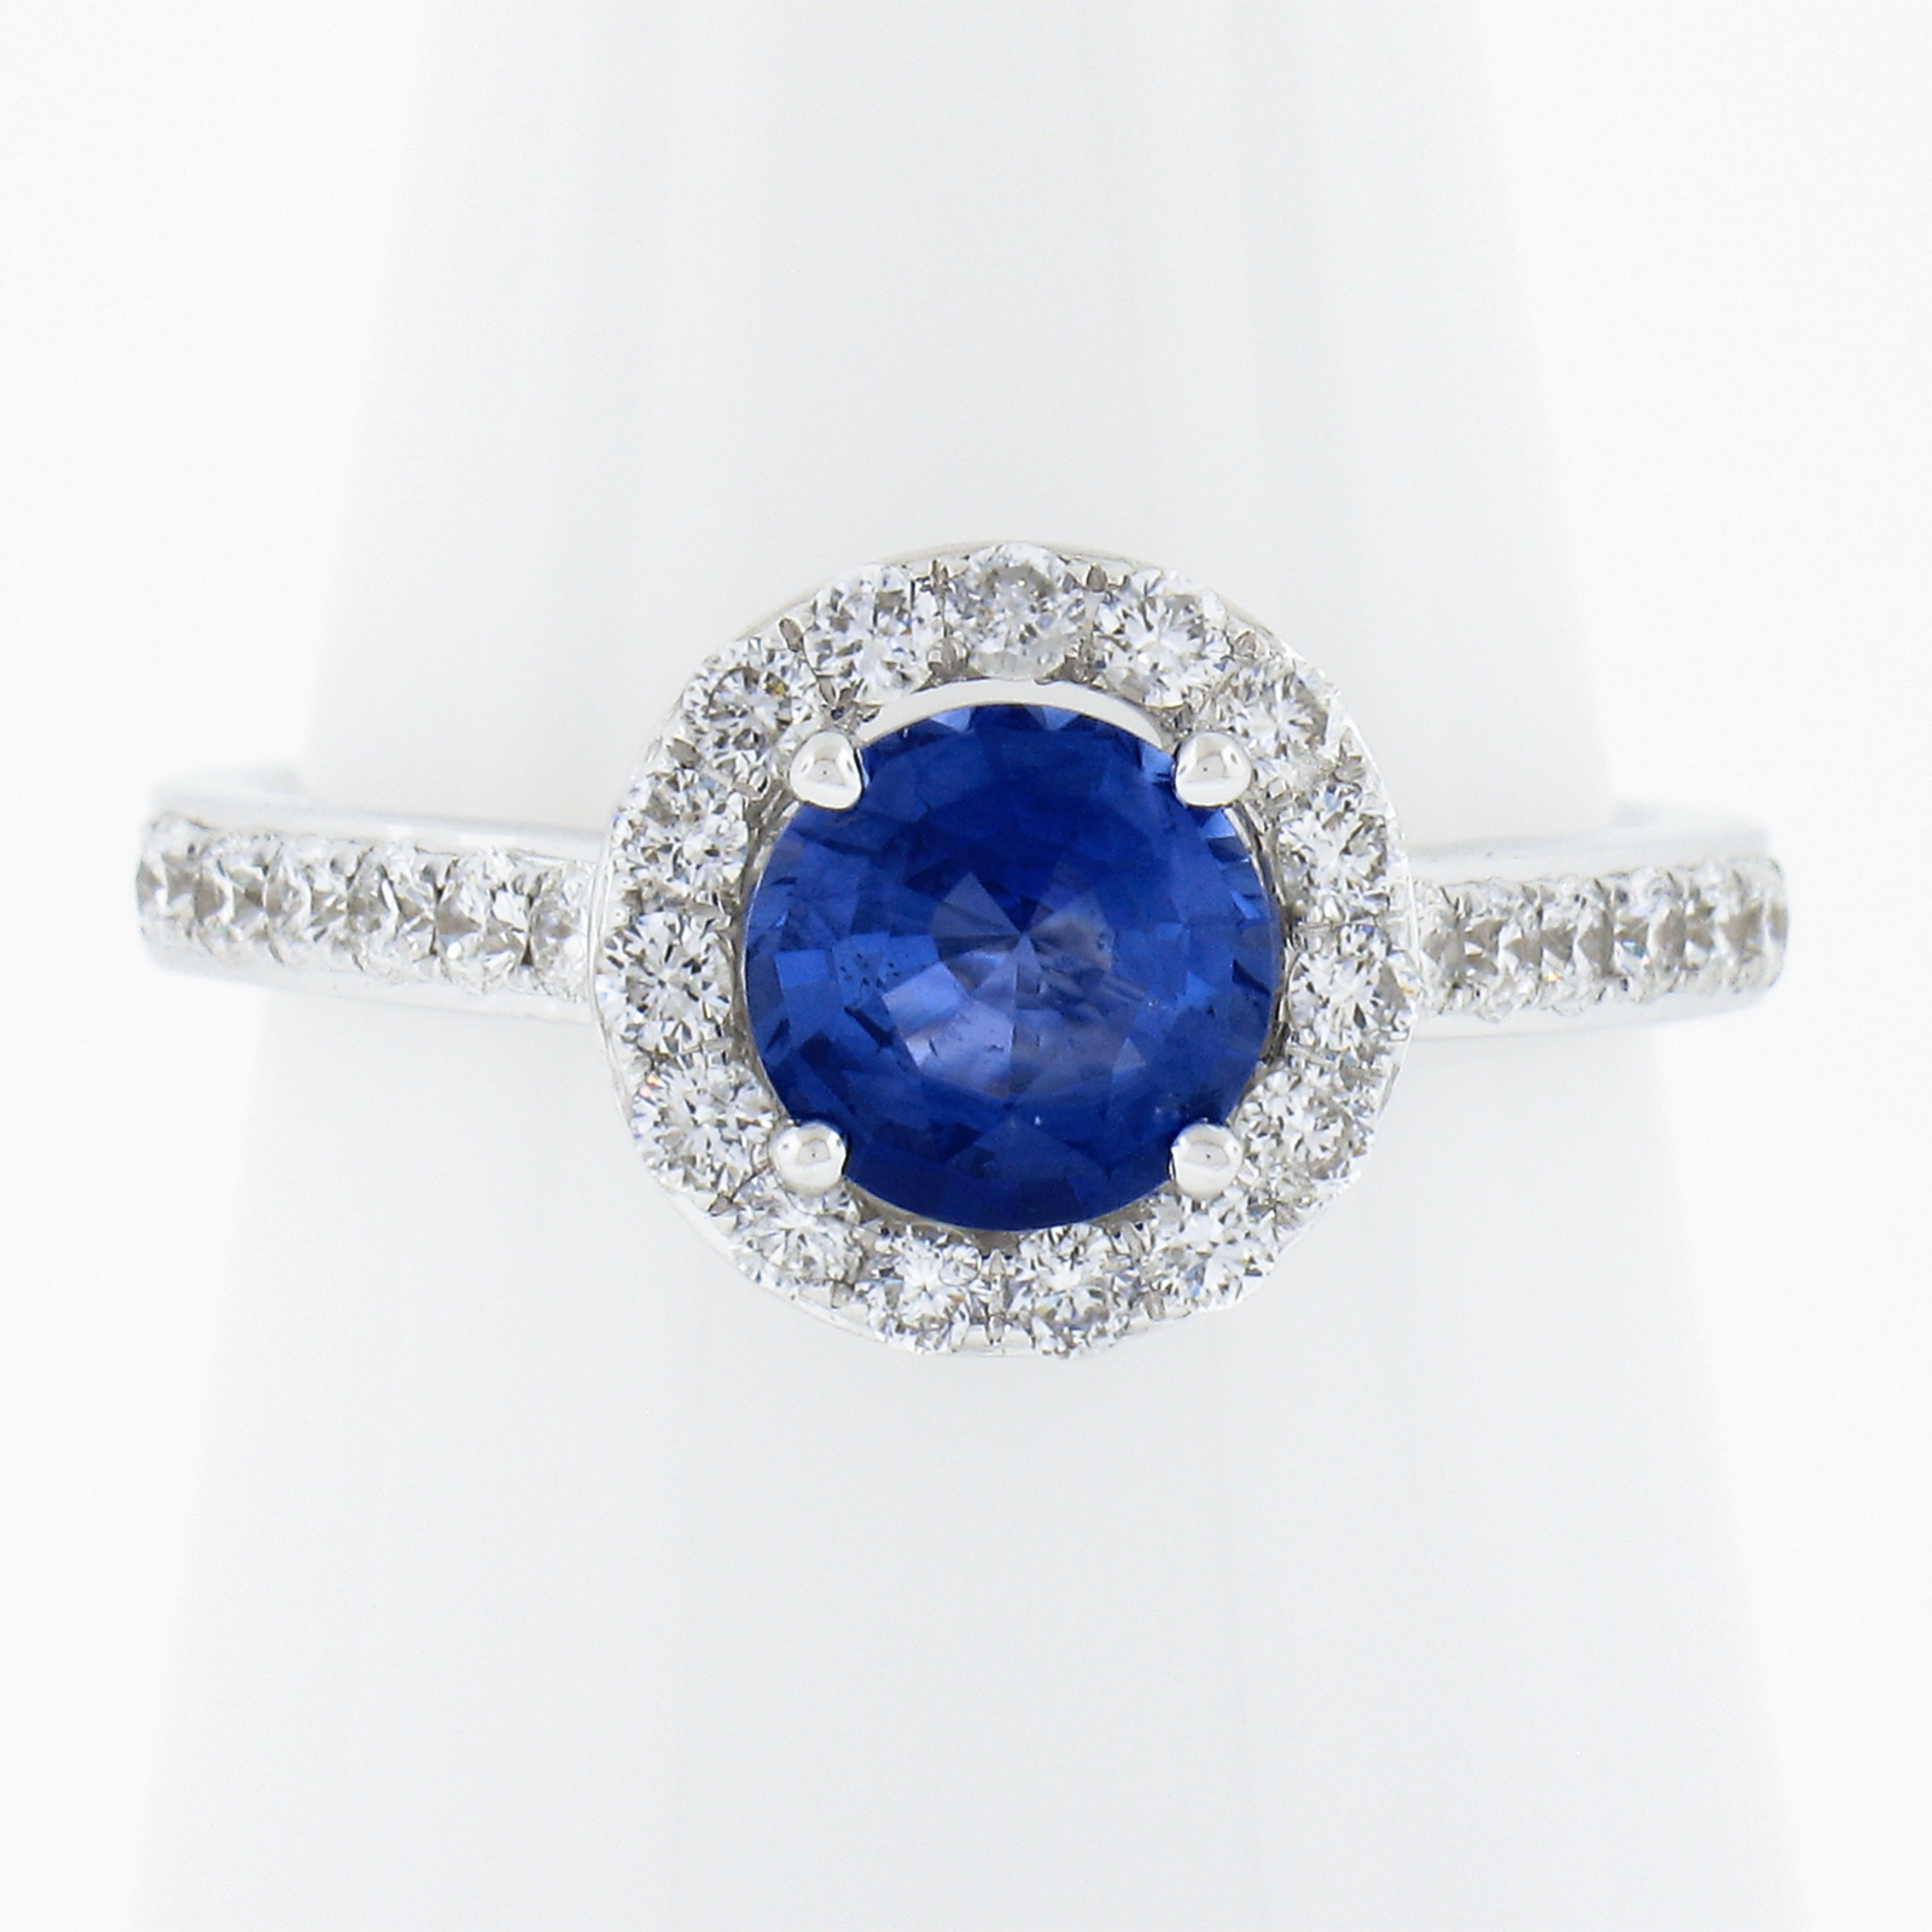 --Stone(s):--
(1) Natural Genuine Sapphire - Round Brilliant Cut - Prong Set - Blue Color -1.11ct (exact - certified)
** See Certification Details Below for Complete Info **
(41) Natural Genuine Diamonds - Round Brilliant Cut - Pave Set - G-I Color